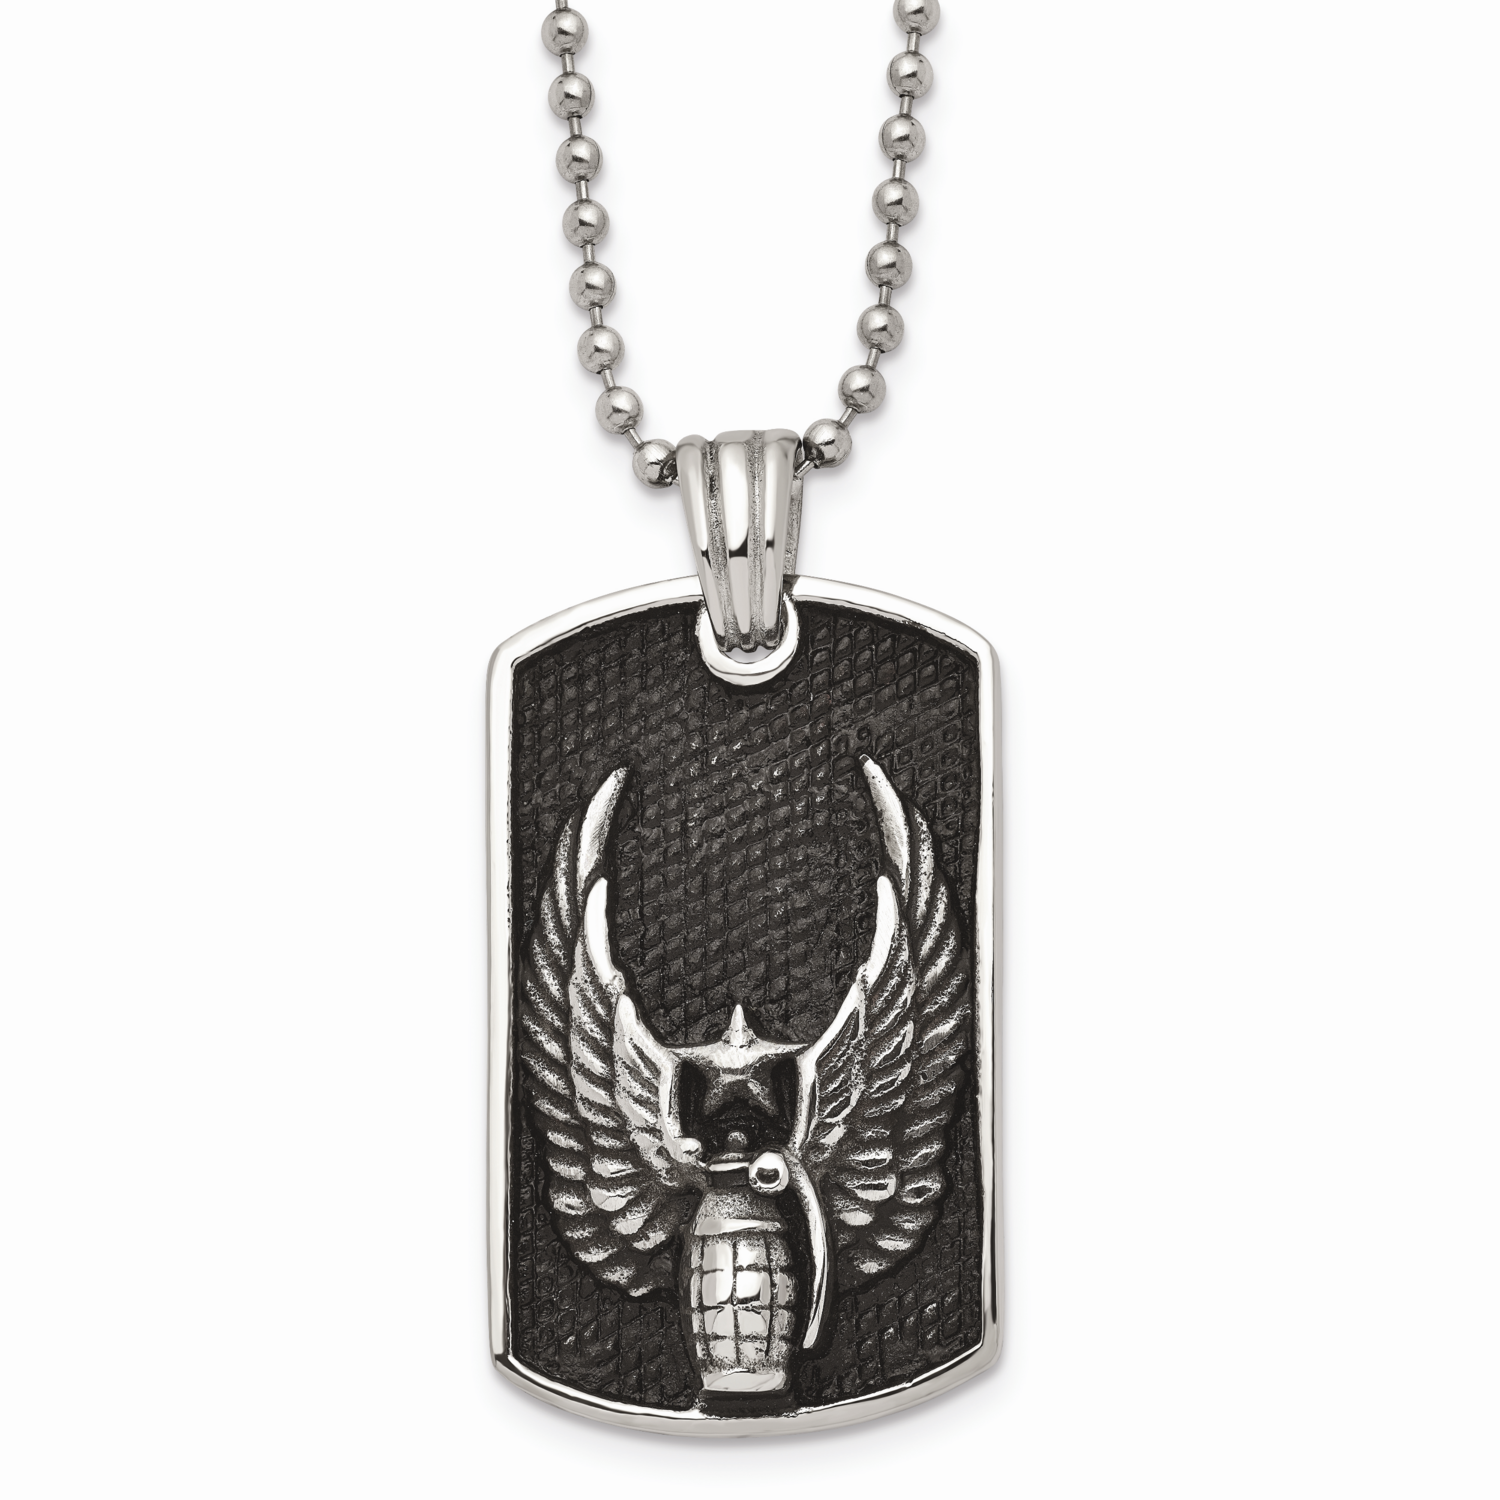 Wings Dog Tag Pendant Necklace Stainless Steel Antiqued SRN923-22